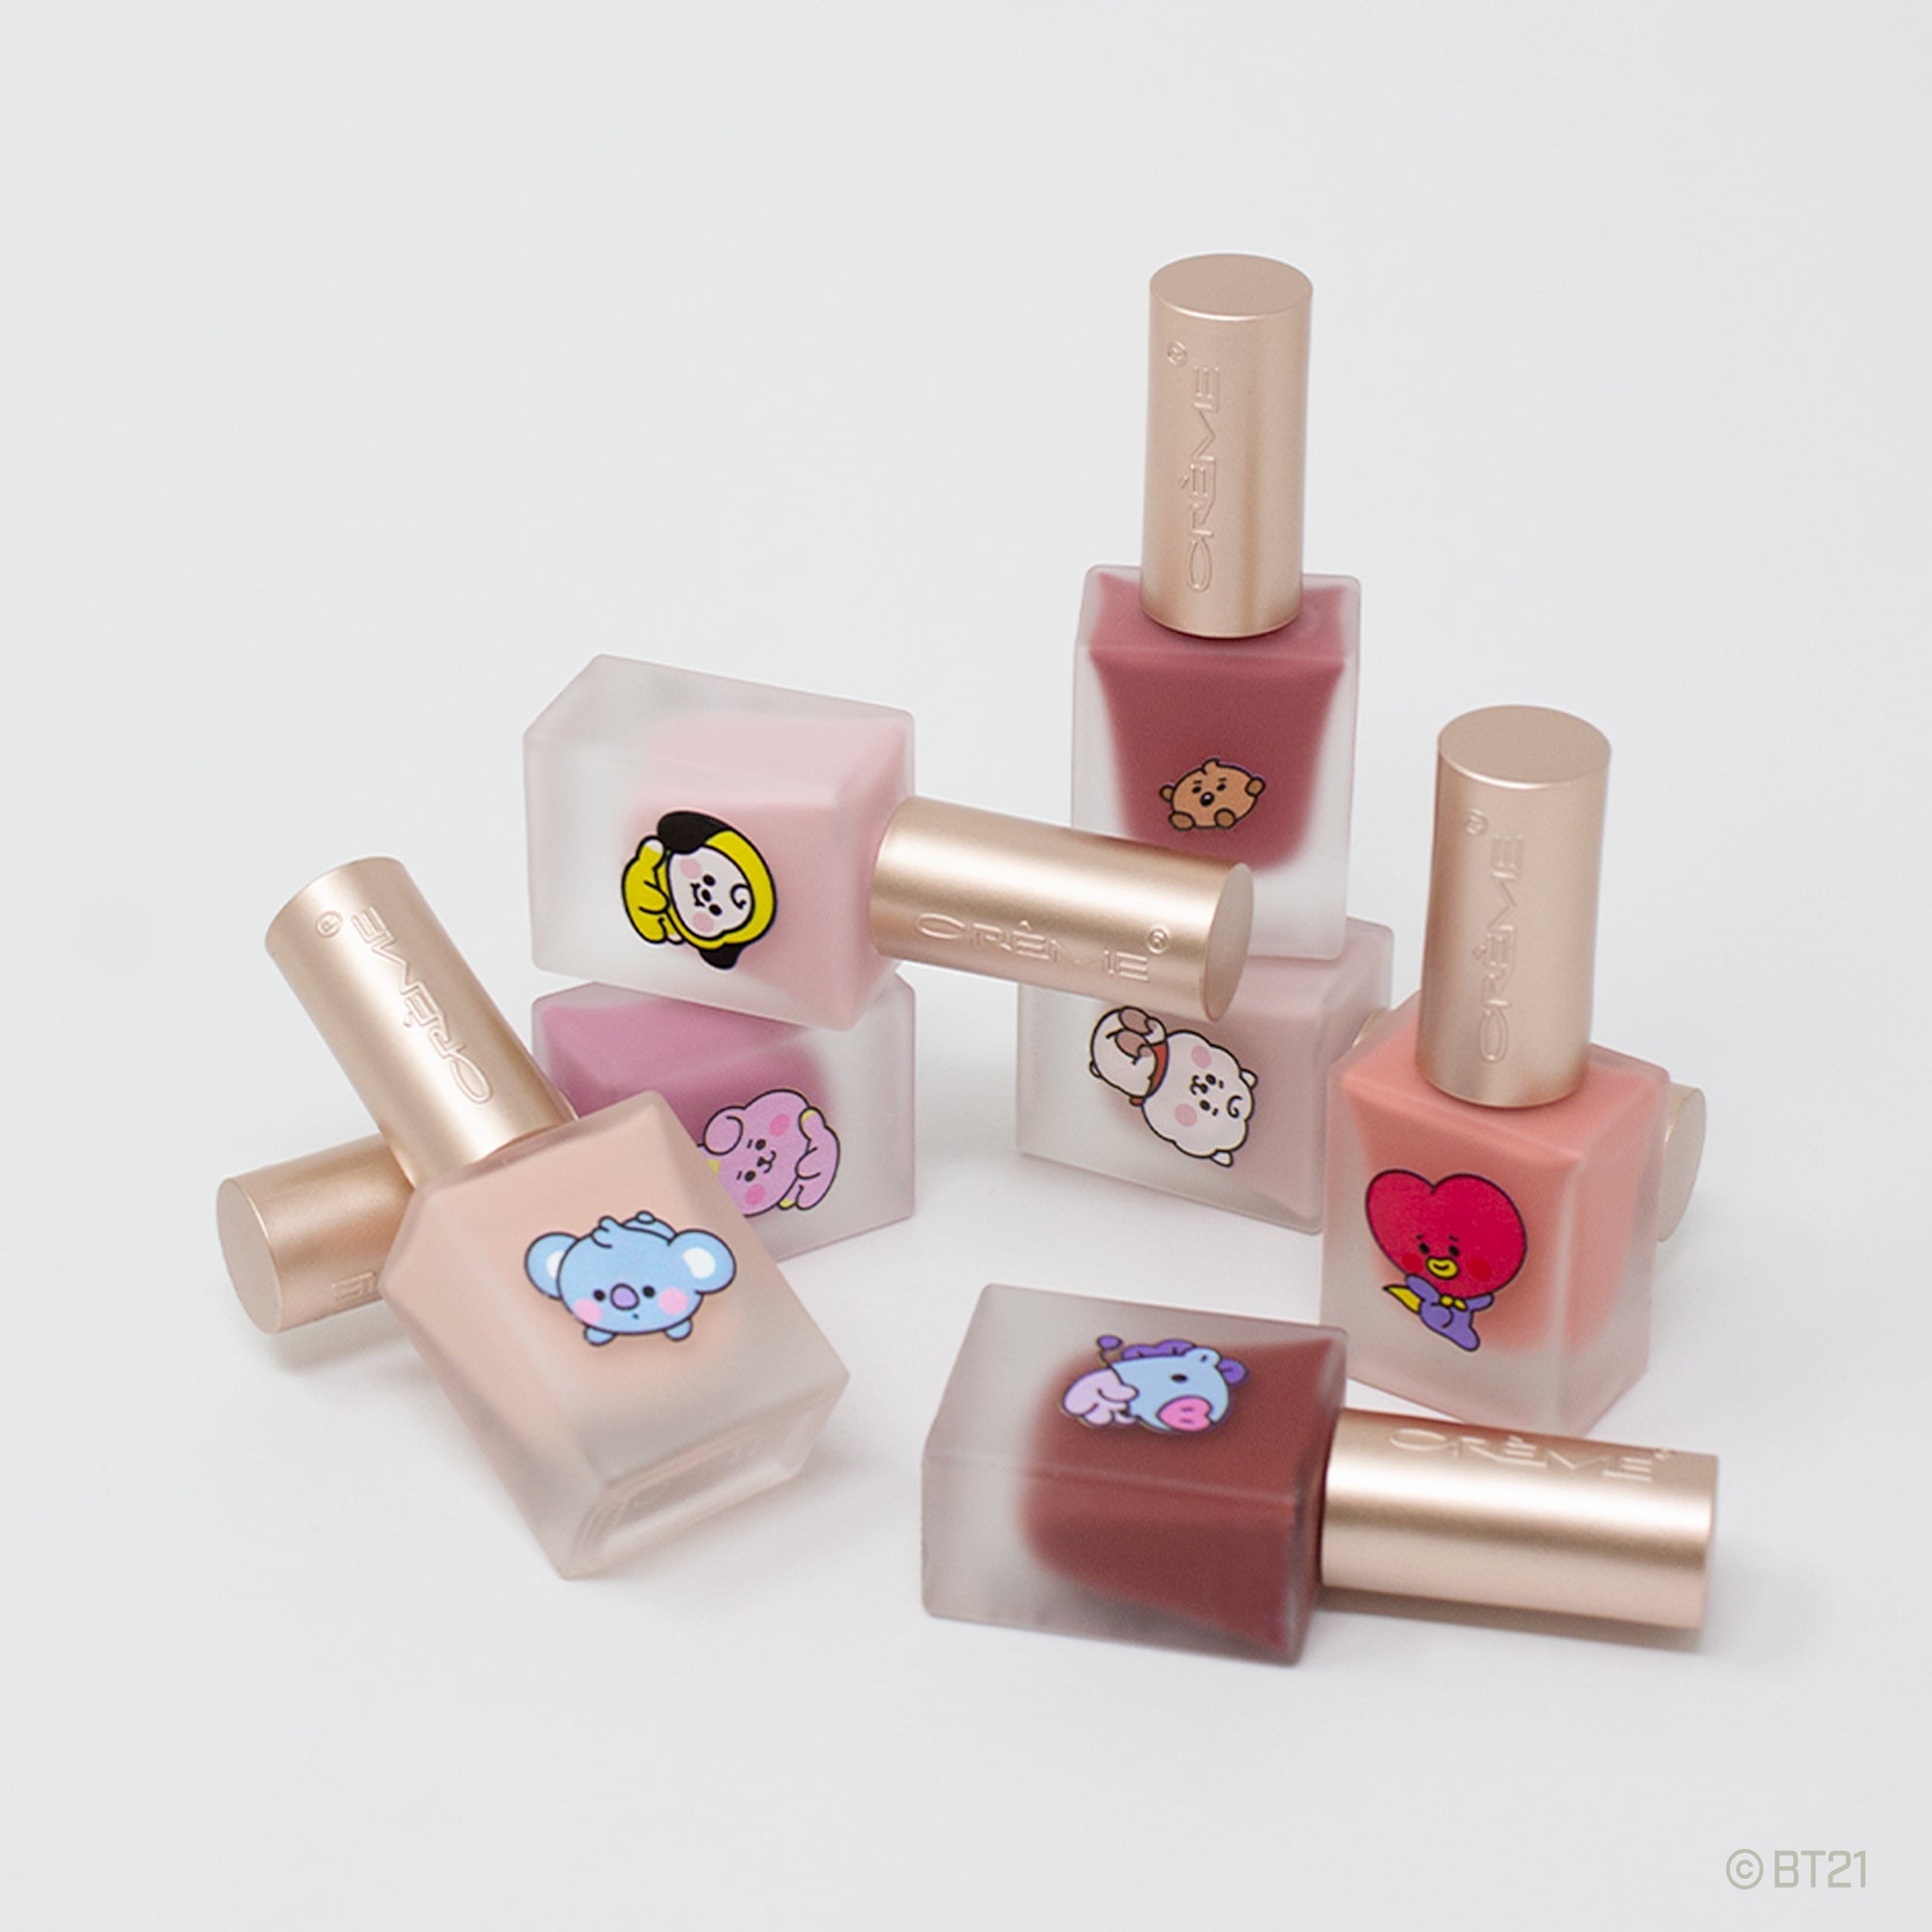 BT21 BABY Universal Love Gel-Effect Nail Polish Collection (Set of 7) Nail Polishes The Crème Shop x BT21 BABY 